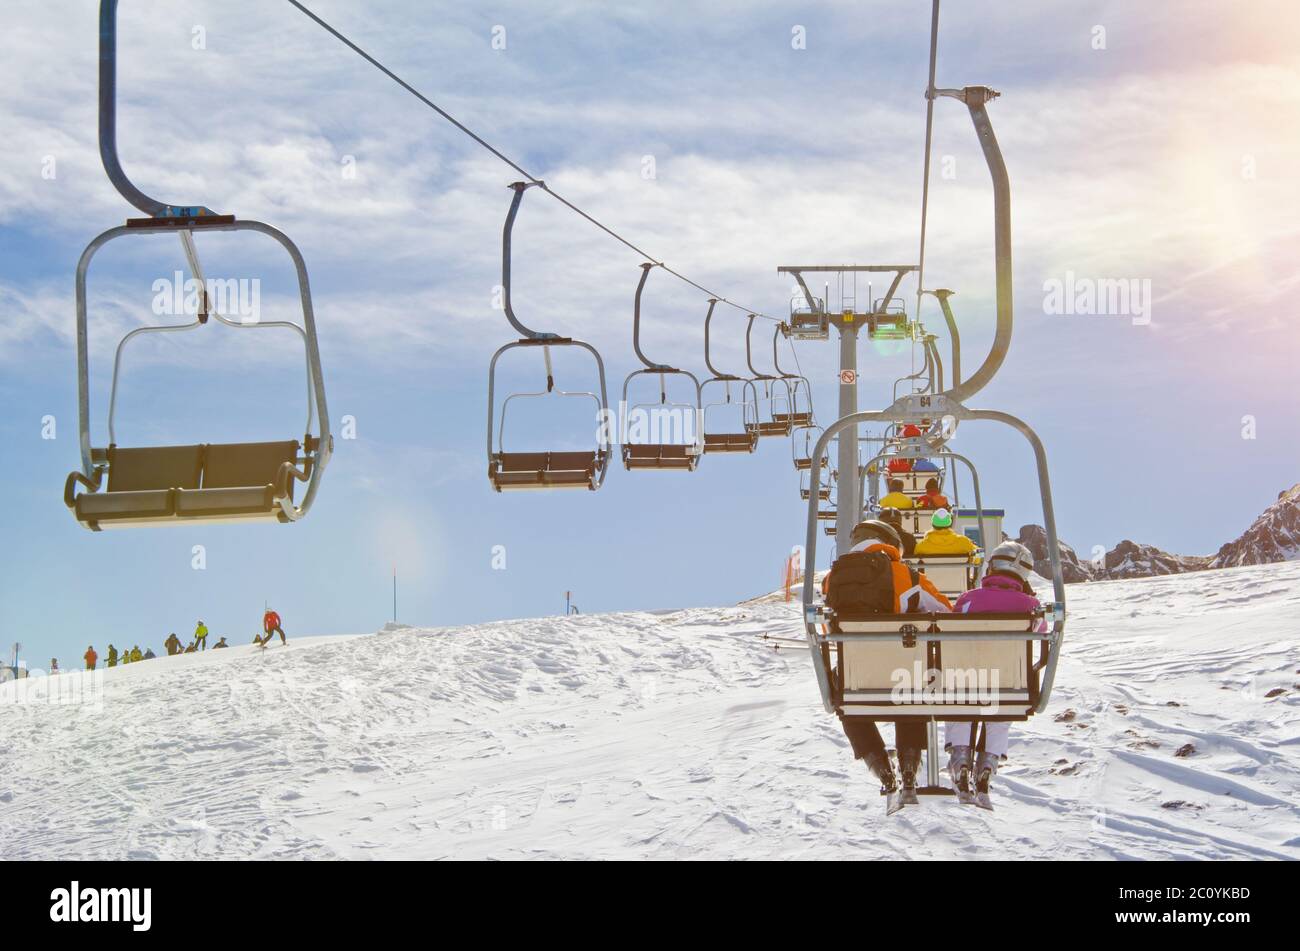 People riding a chairlift in a ski resort in winter Stock Photo